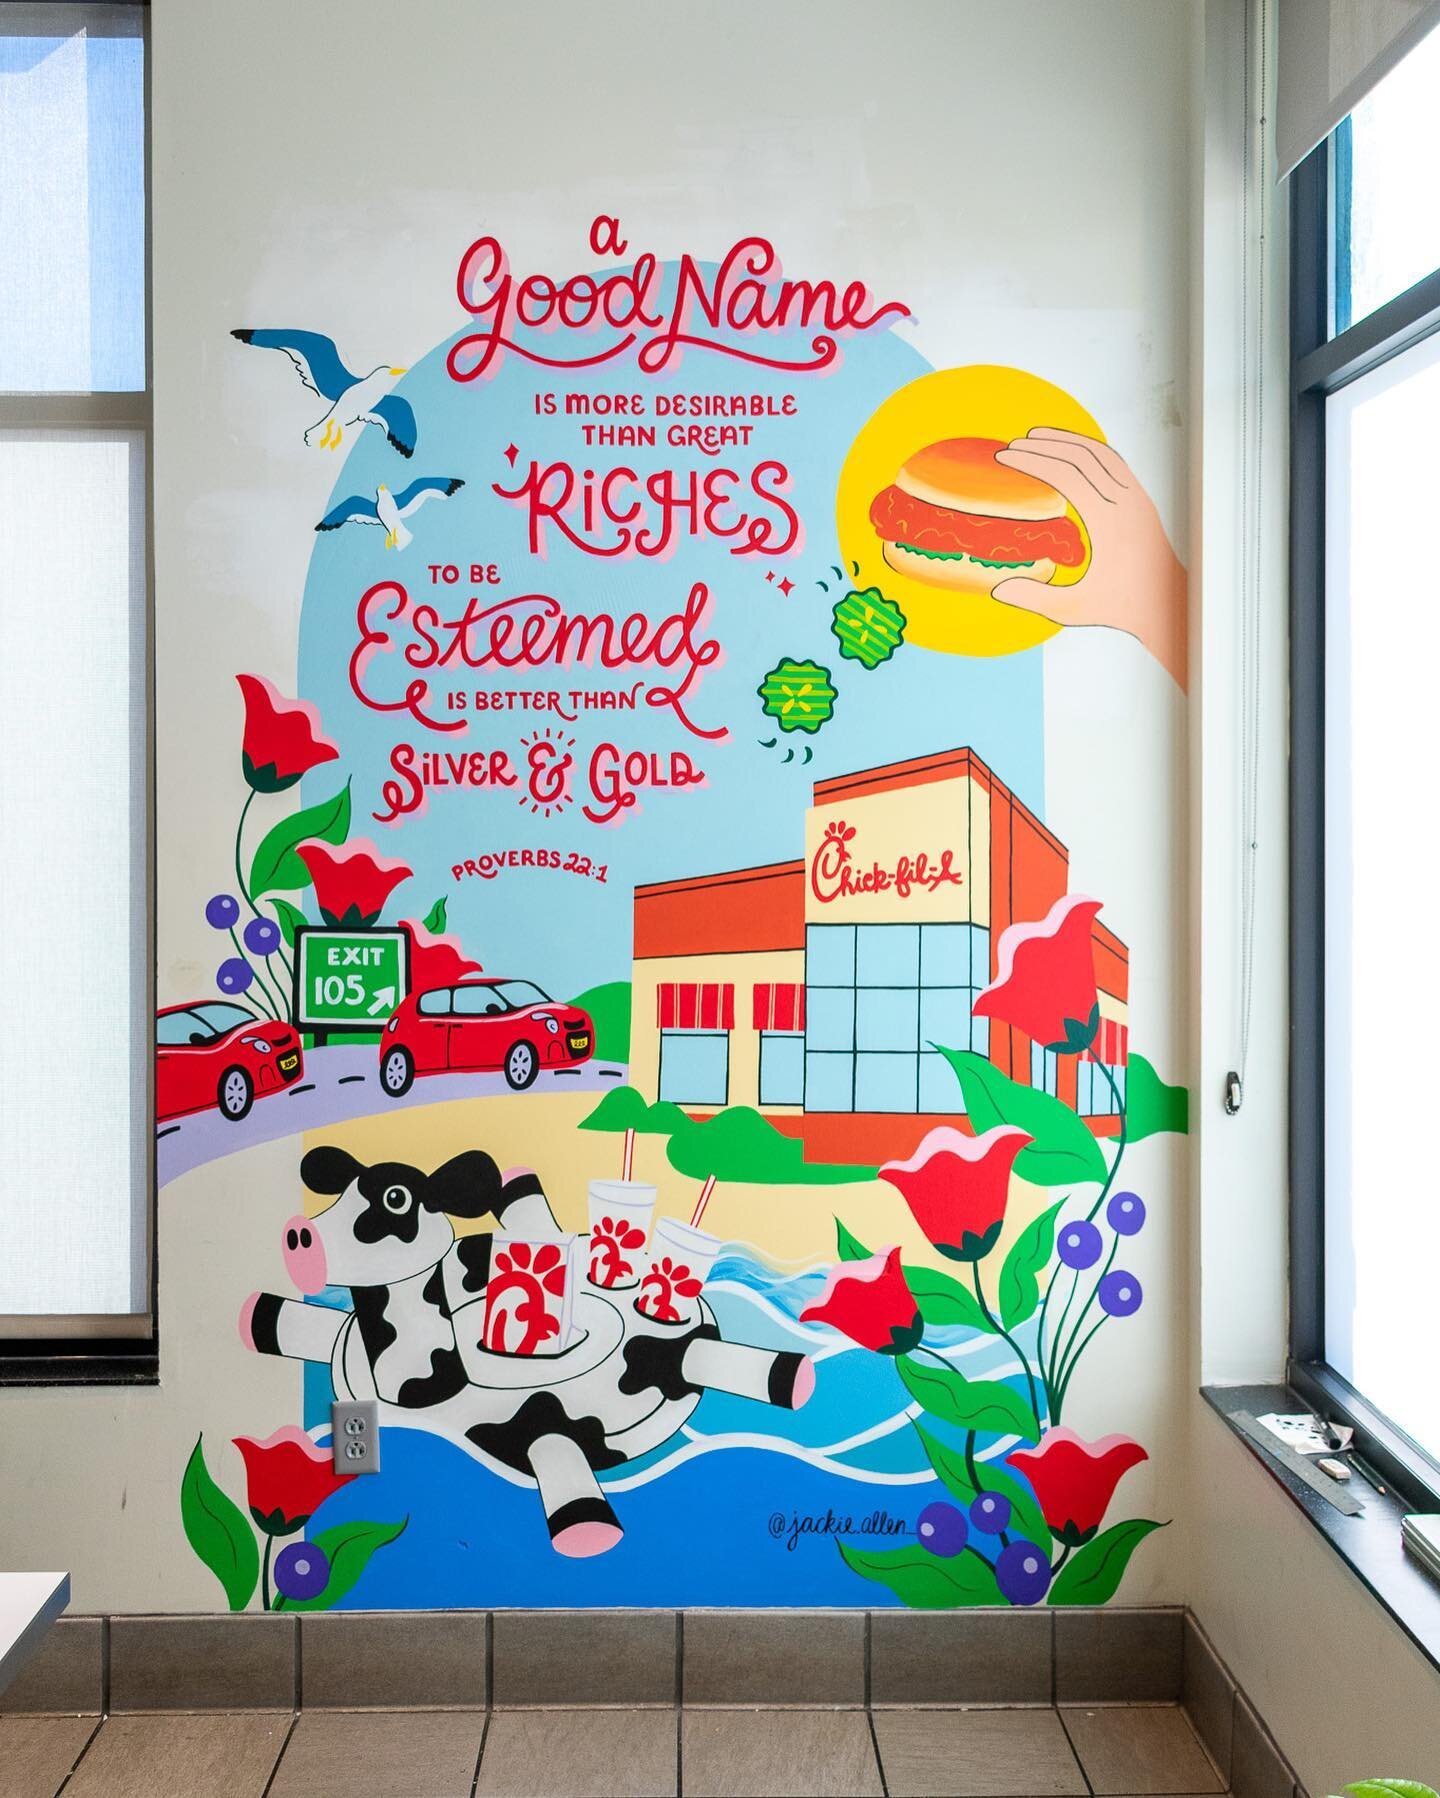 SO happy with how this mural turned out at Chick-Fil-A in Eatontown, NJ! The lettering was definitely not the easiest part, but was so worth the final result.

Huge thank you to everyone at @cfaeatontown for being so welcoming and complimentary! It w